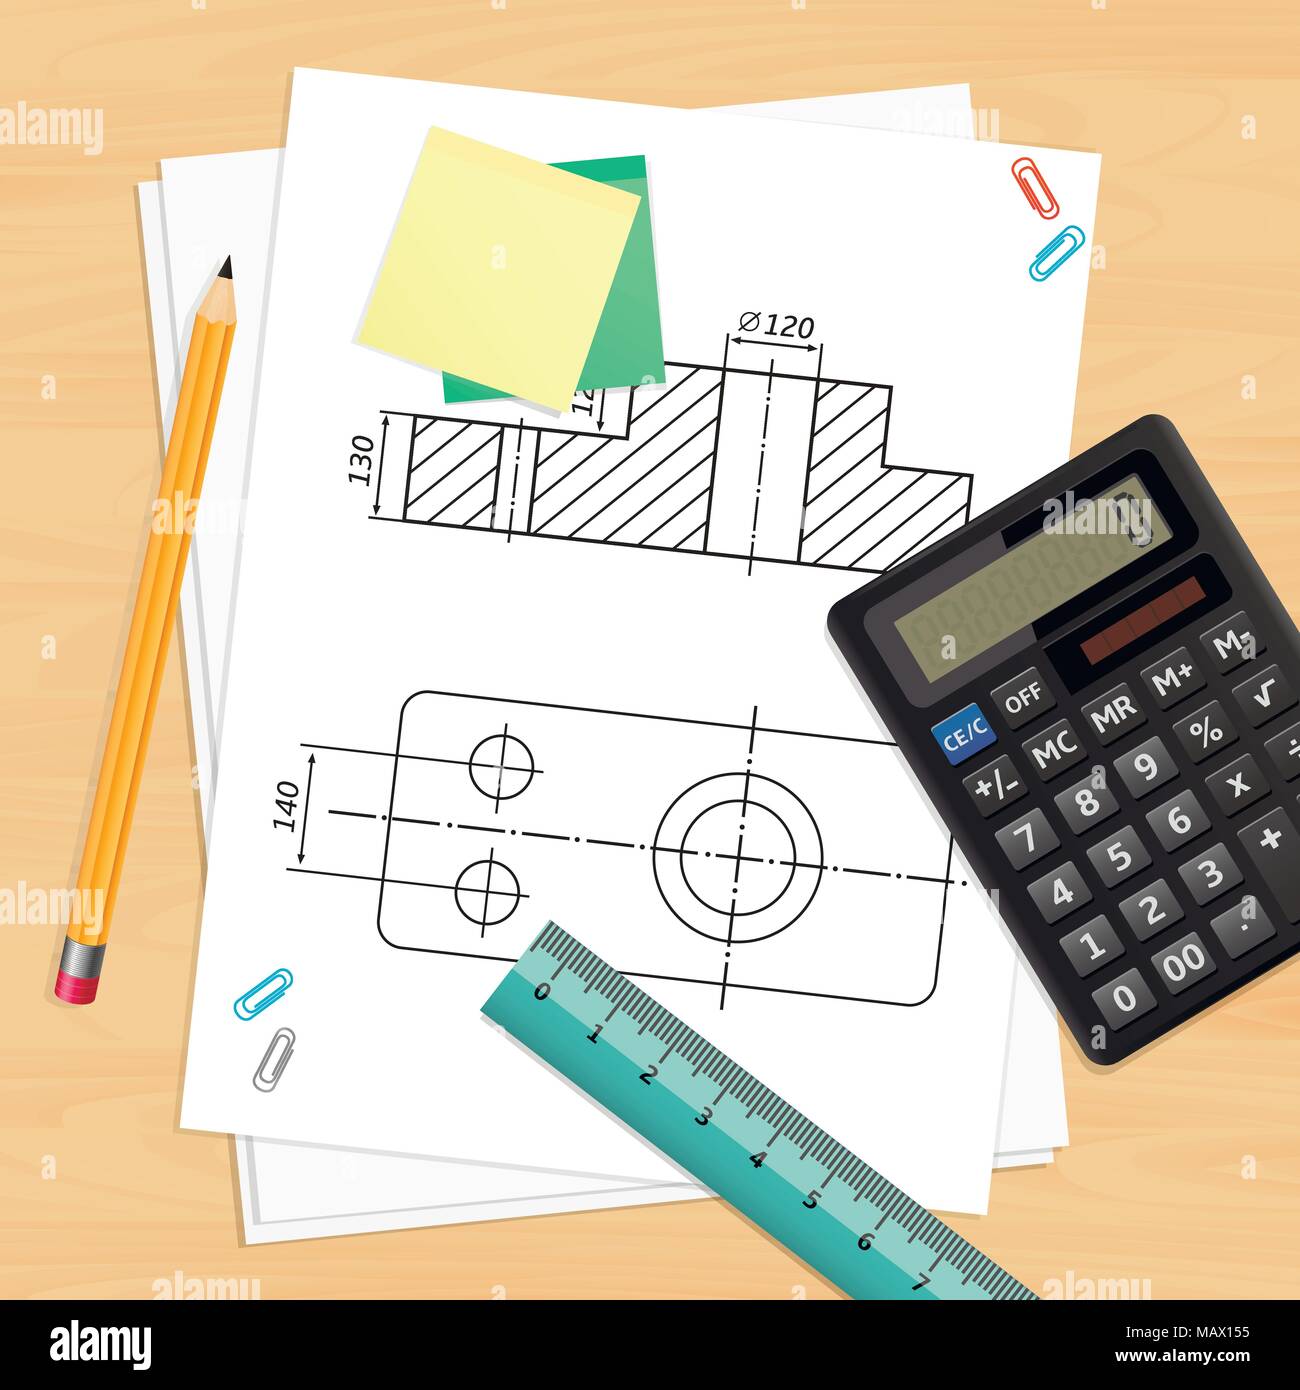 Engineer Or Architect Wooden Drafting Ruler With An Imperial And A Metric  Units Scale Stock Illustration - Download Image Now - iStock